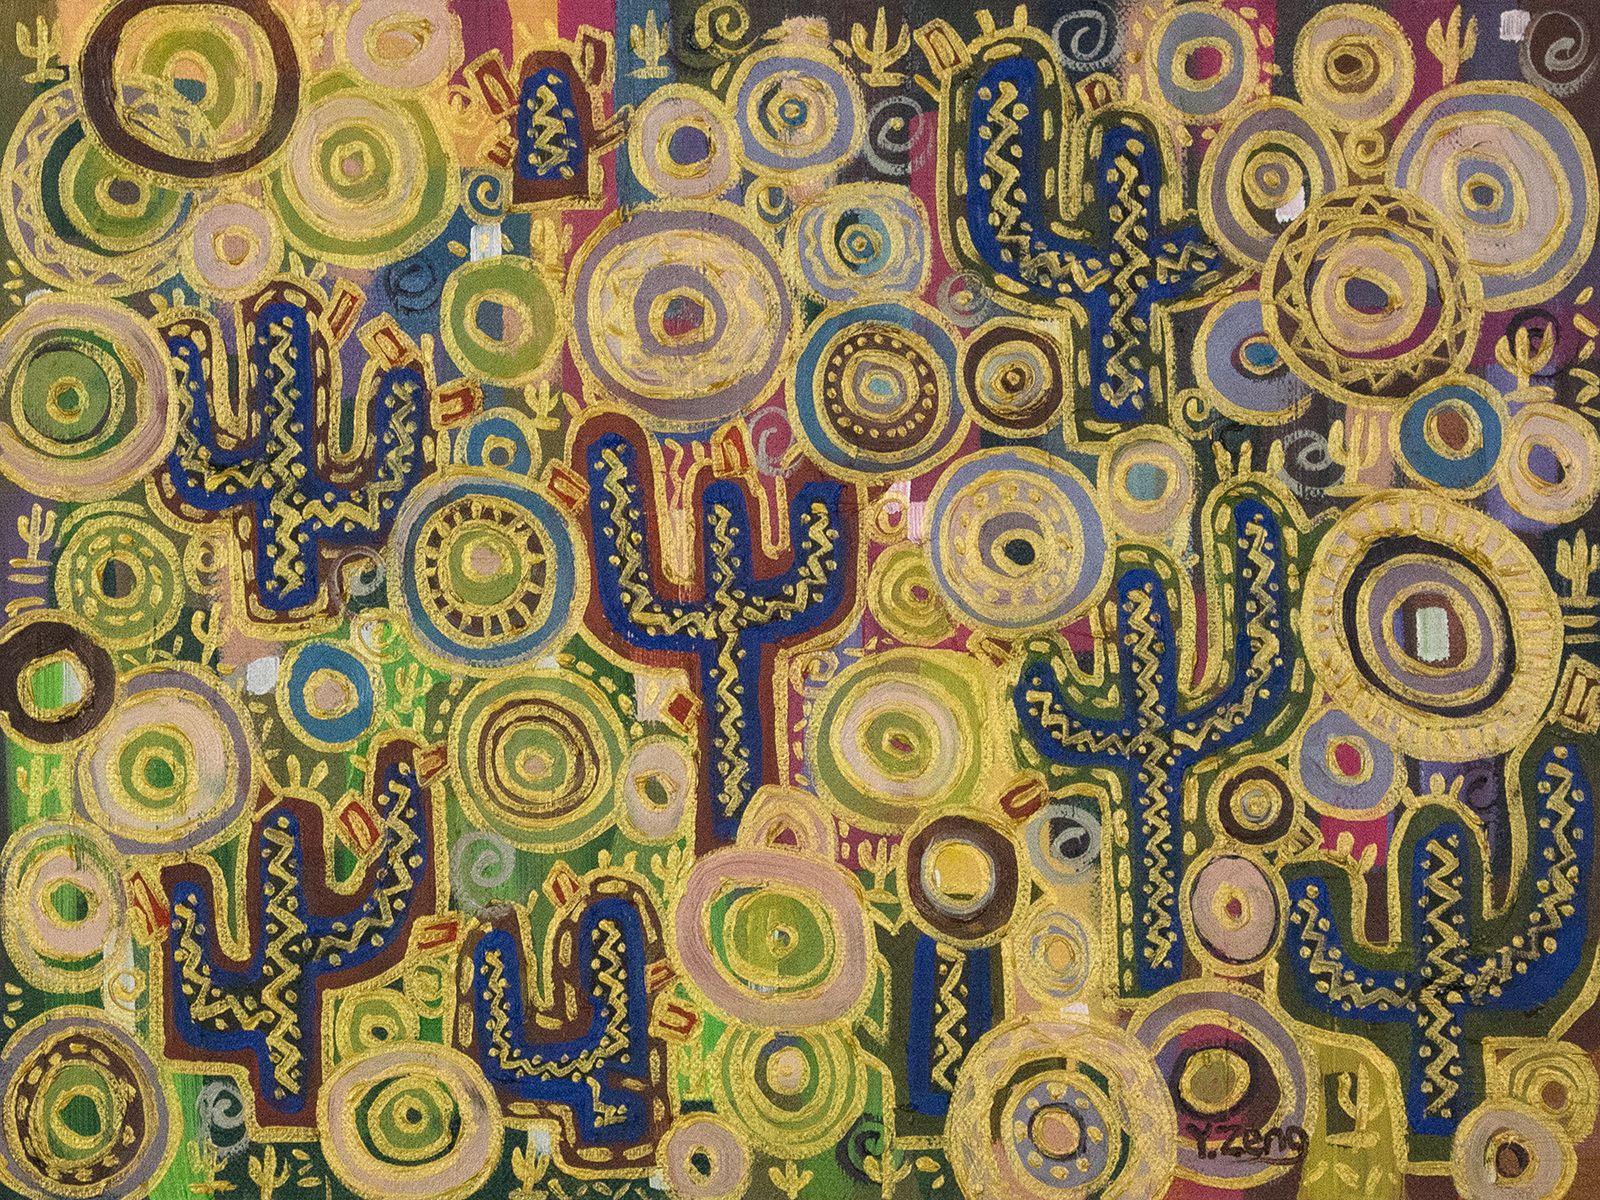 Yue Zeng Abstract Painting - Upcycle #5 Cactus patch, Painting, Oil on Canvas